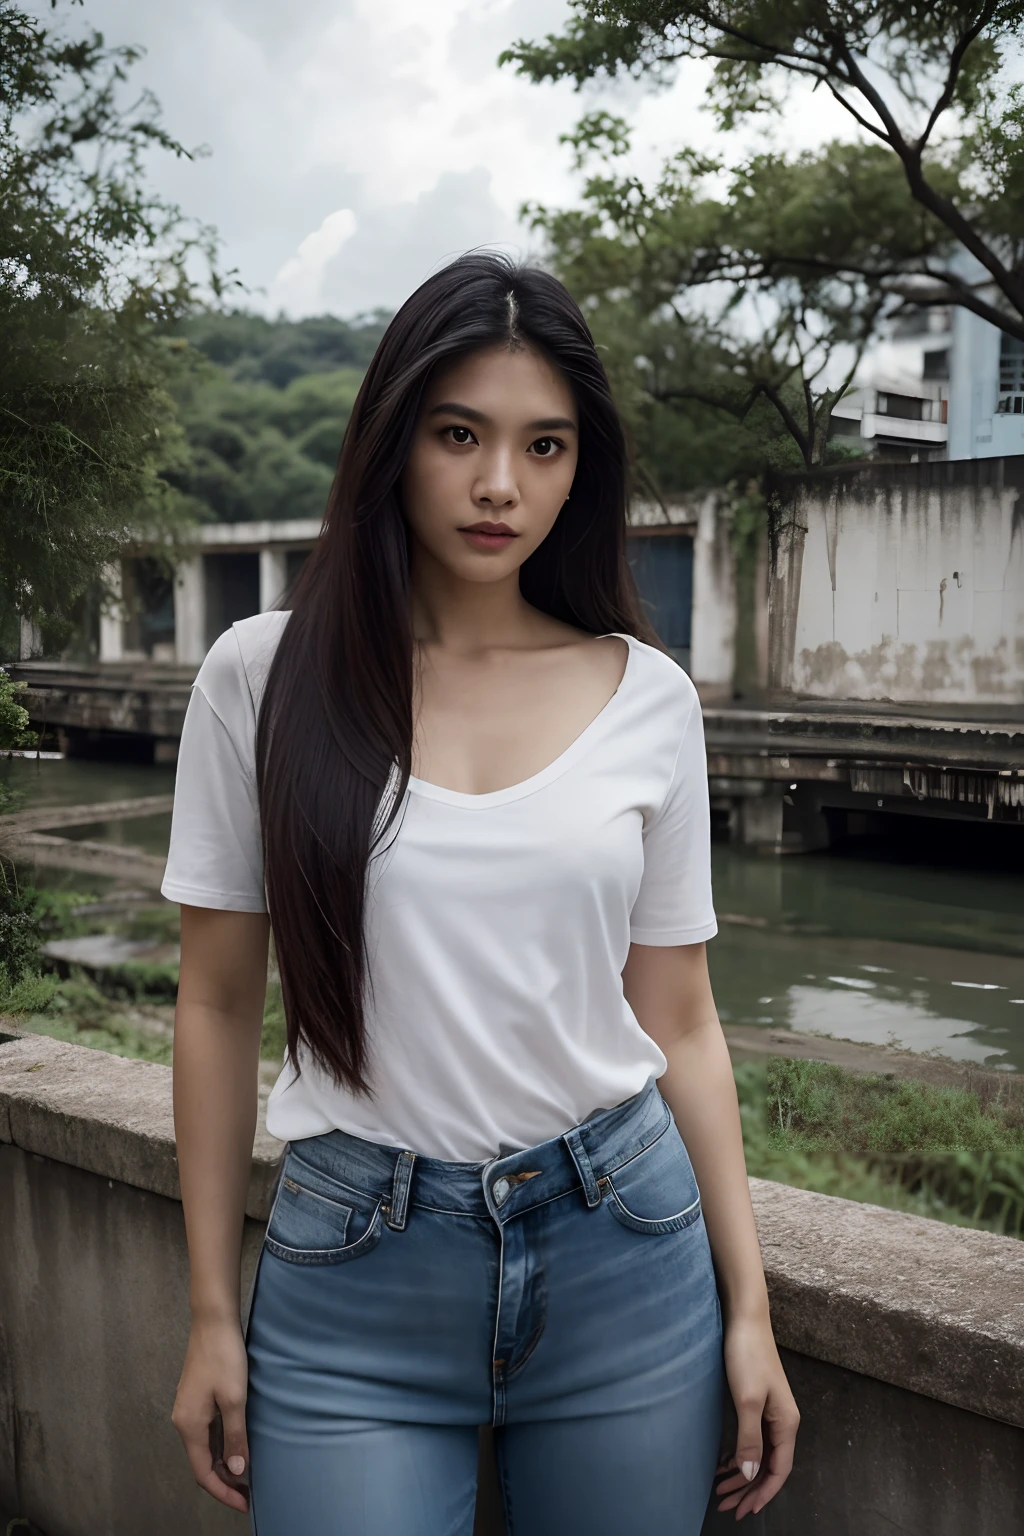 Thai Women, look at viewr, Long hair, Shirt, jeans, cloud, day, skyporn,Outdoors, Post-apocalypse, Ruins, Scenery, tree, Water,Hanging,nudde